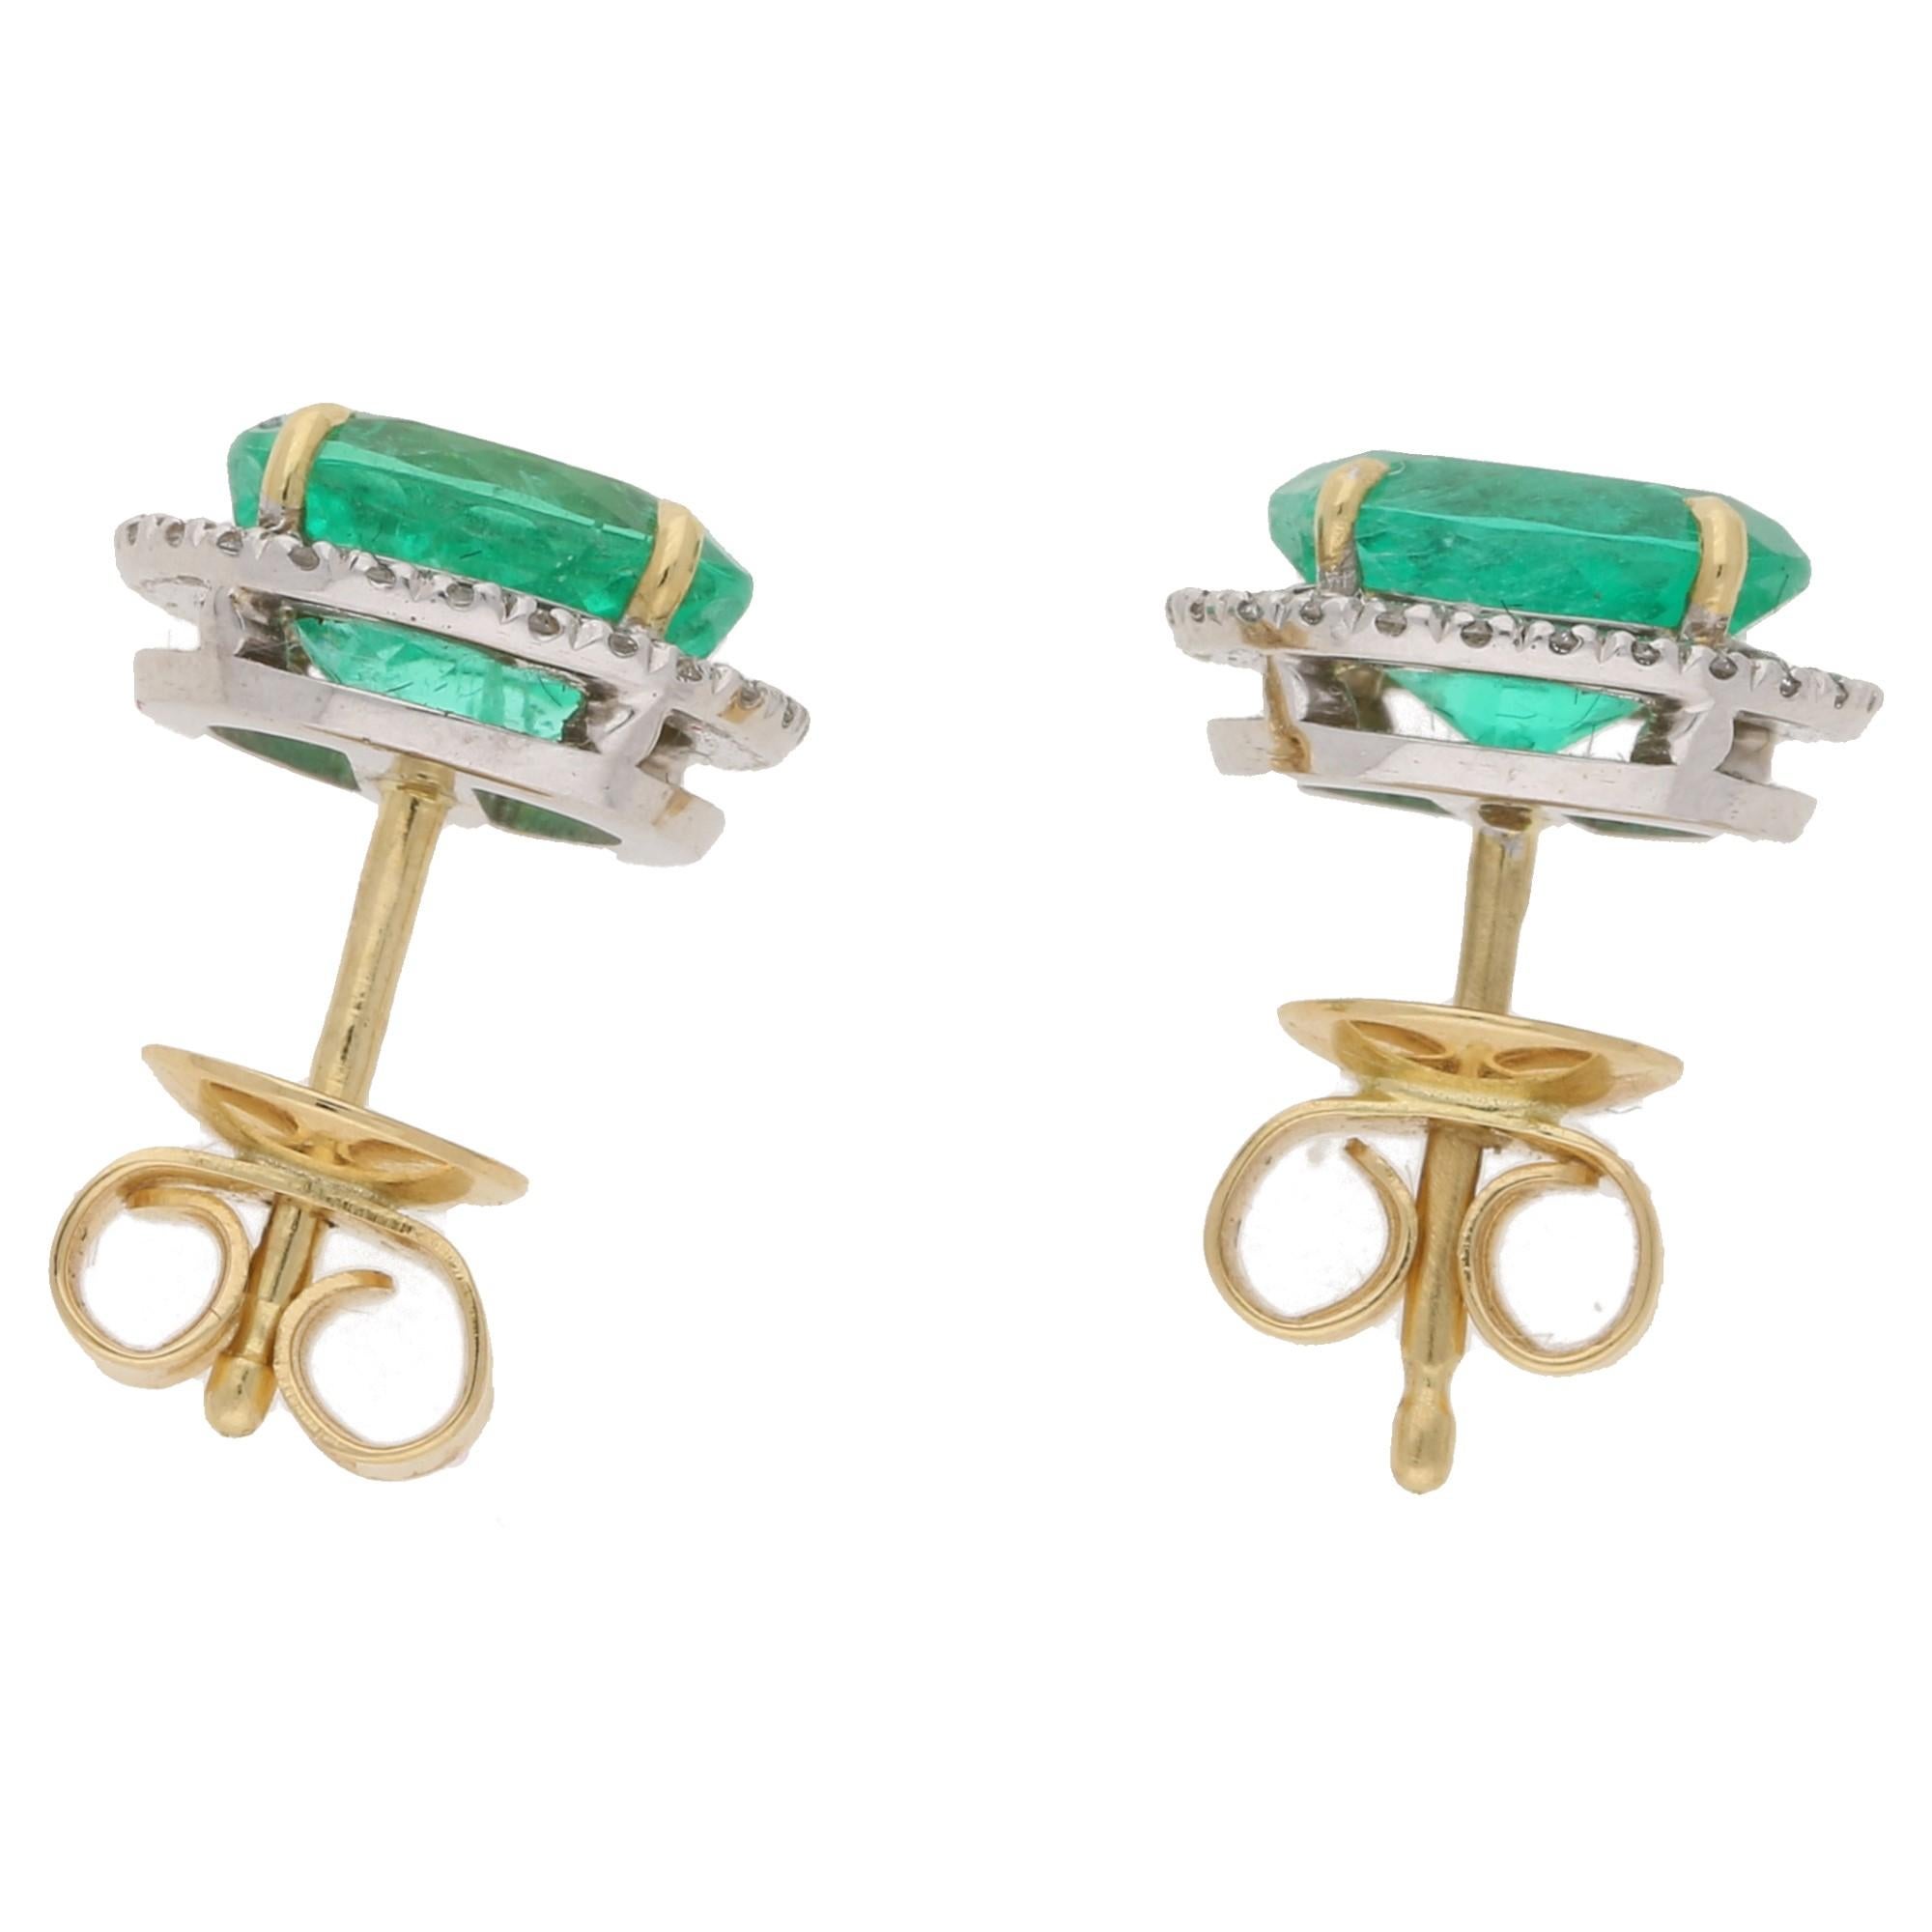 A stunning pair of emerald halo stud earrings set in 18ct gold featuring 1.36ct and 1.28ct oval cut Columbian emeralds independently certified by GCS, set in four claw yellow gold settings with a diamond halo surround set in white gold to post and